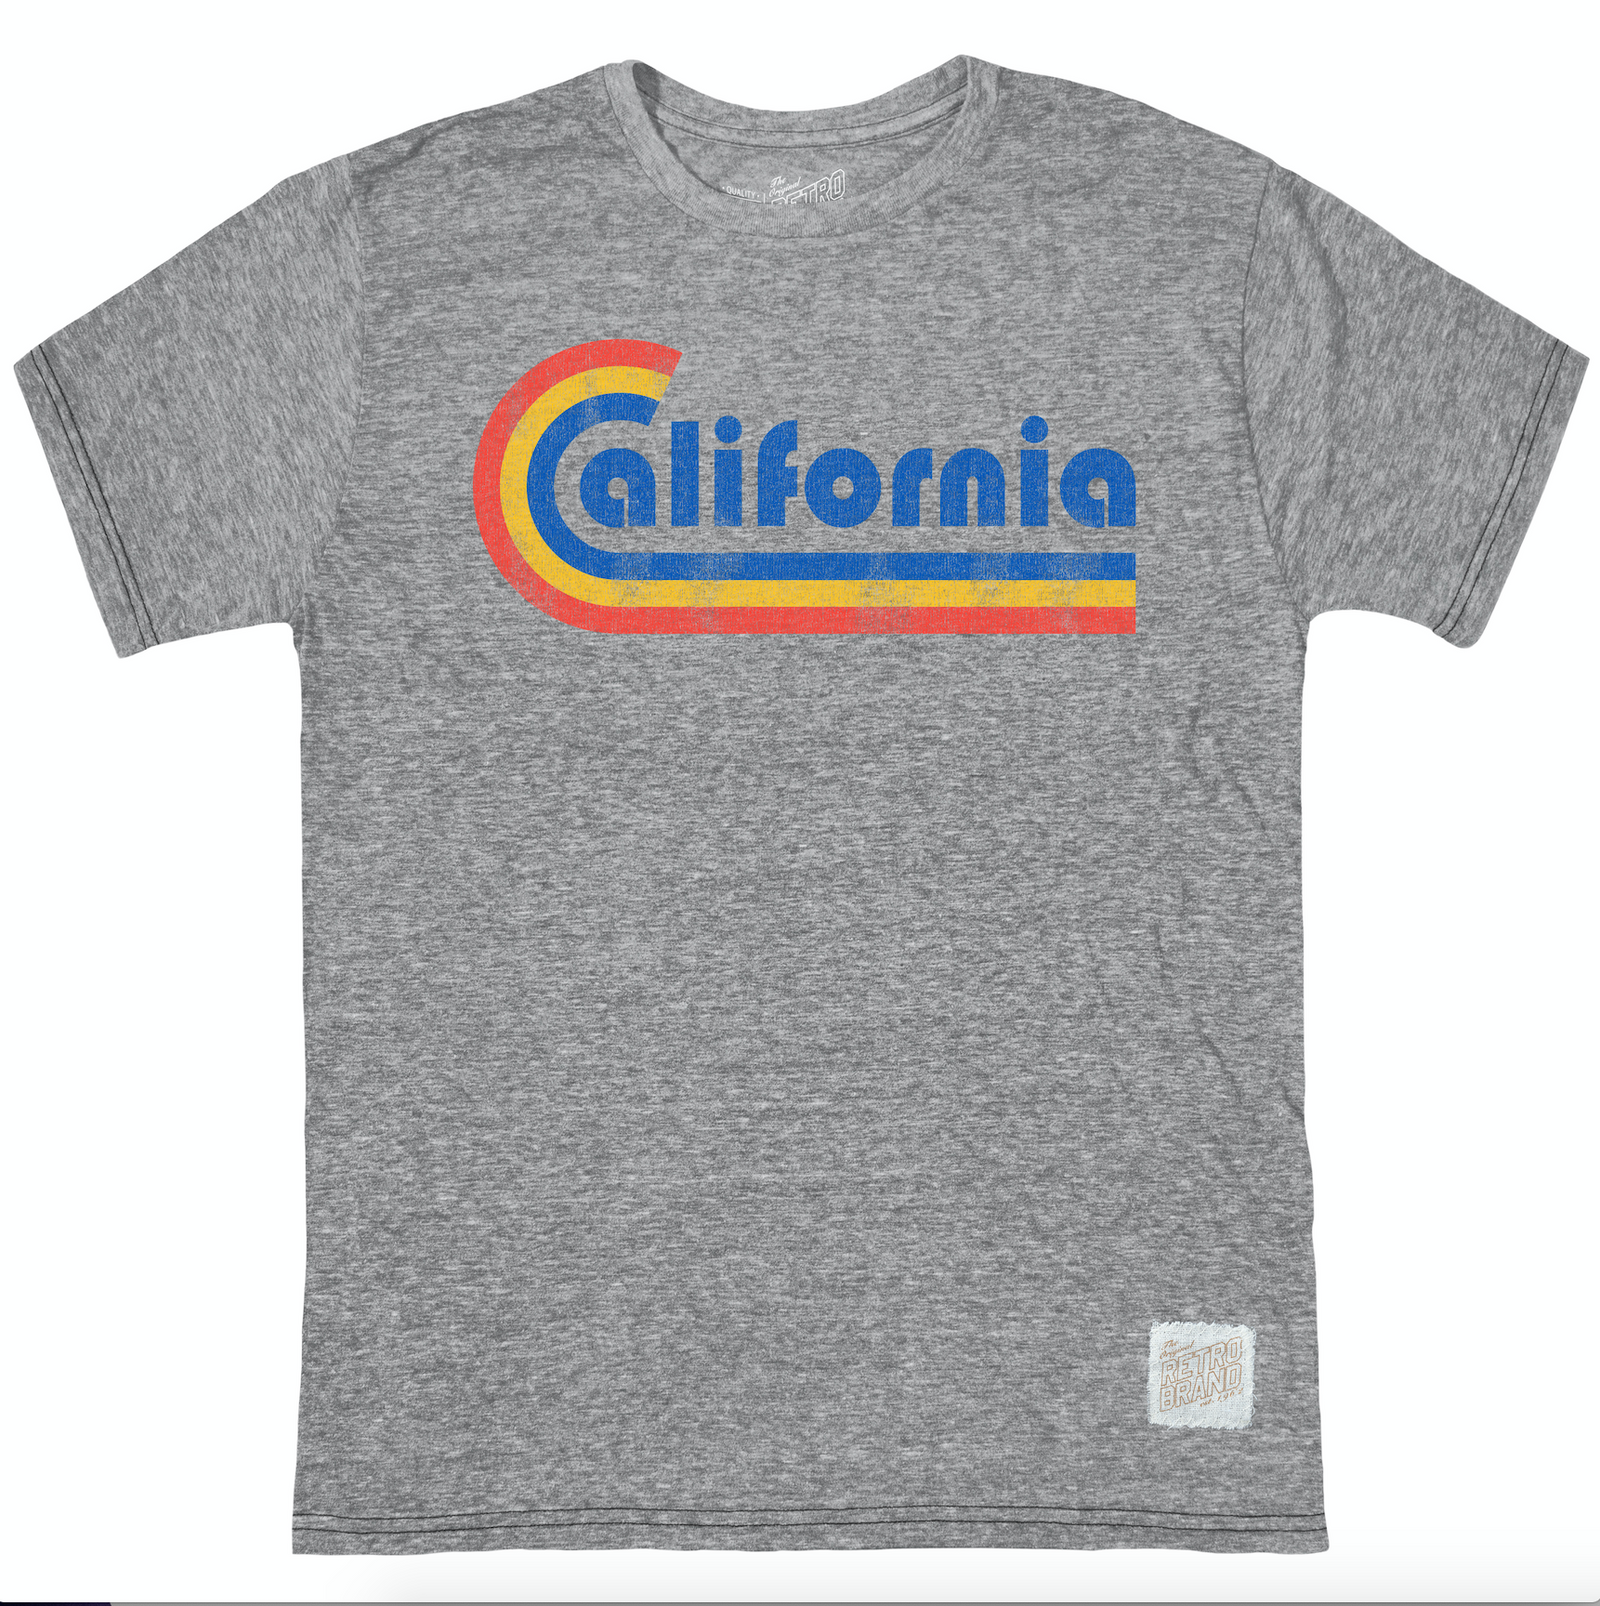 California in blue font with C contiuing as blue underline along with gold and red underlines as well on our tri-blend unisex tee in streaky gray